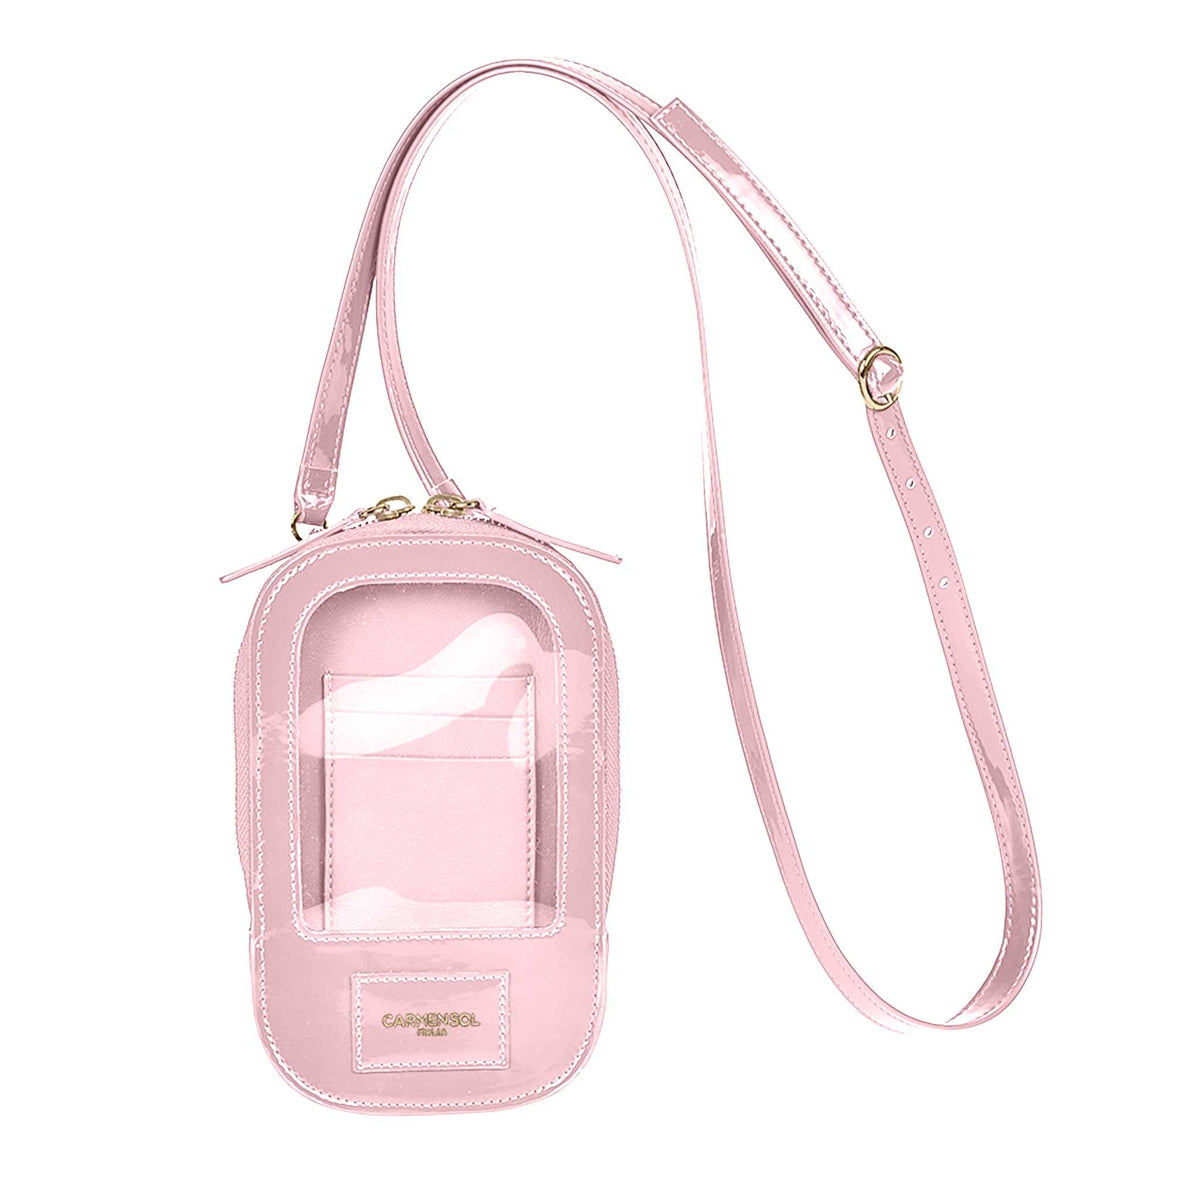 Gio smartphone holder in color baby pink